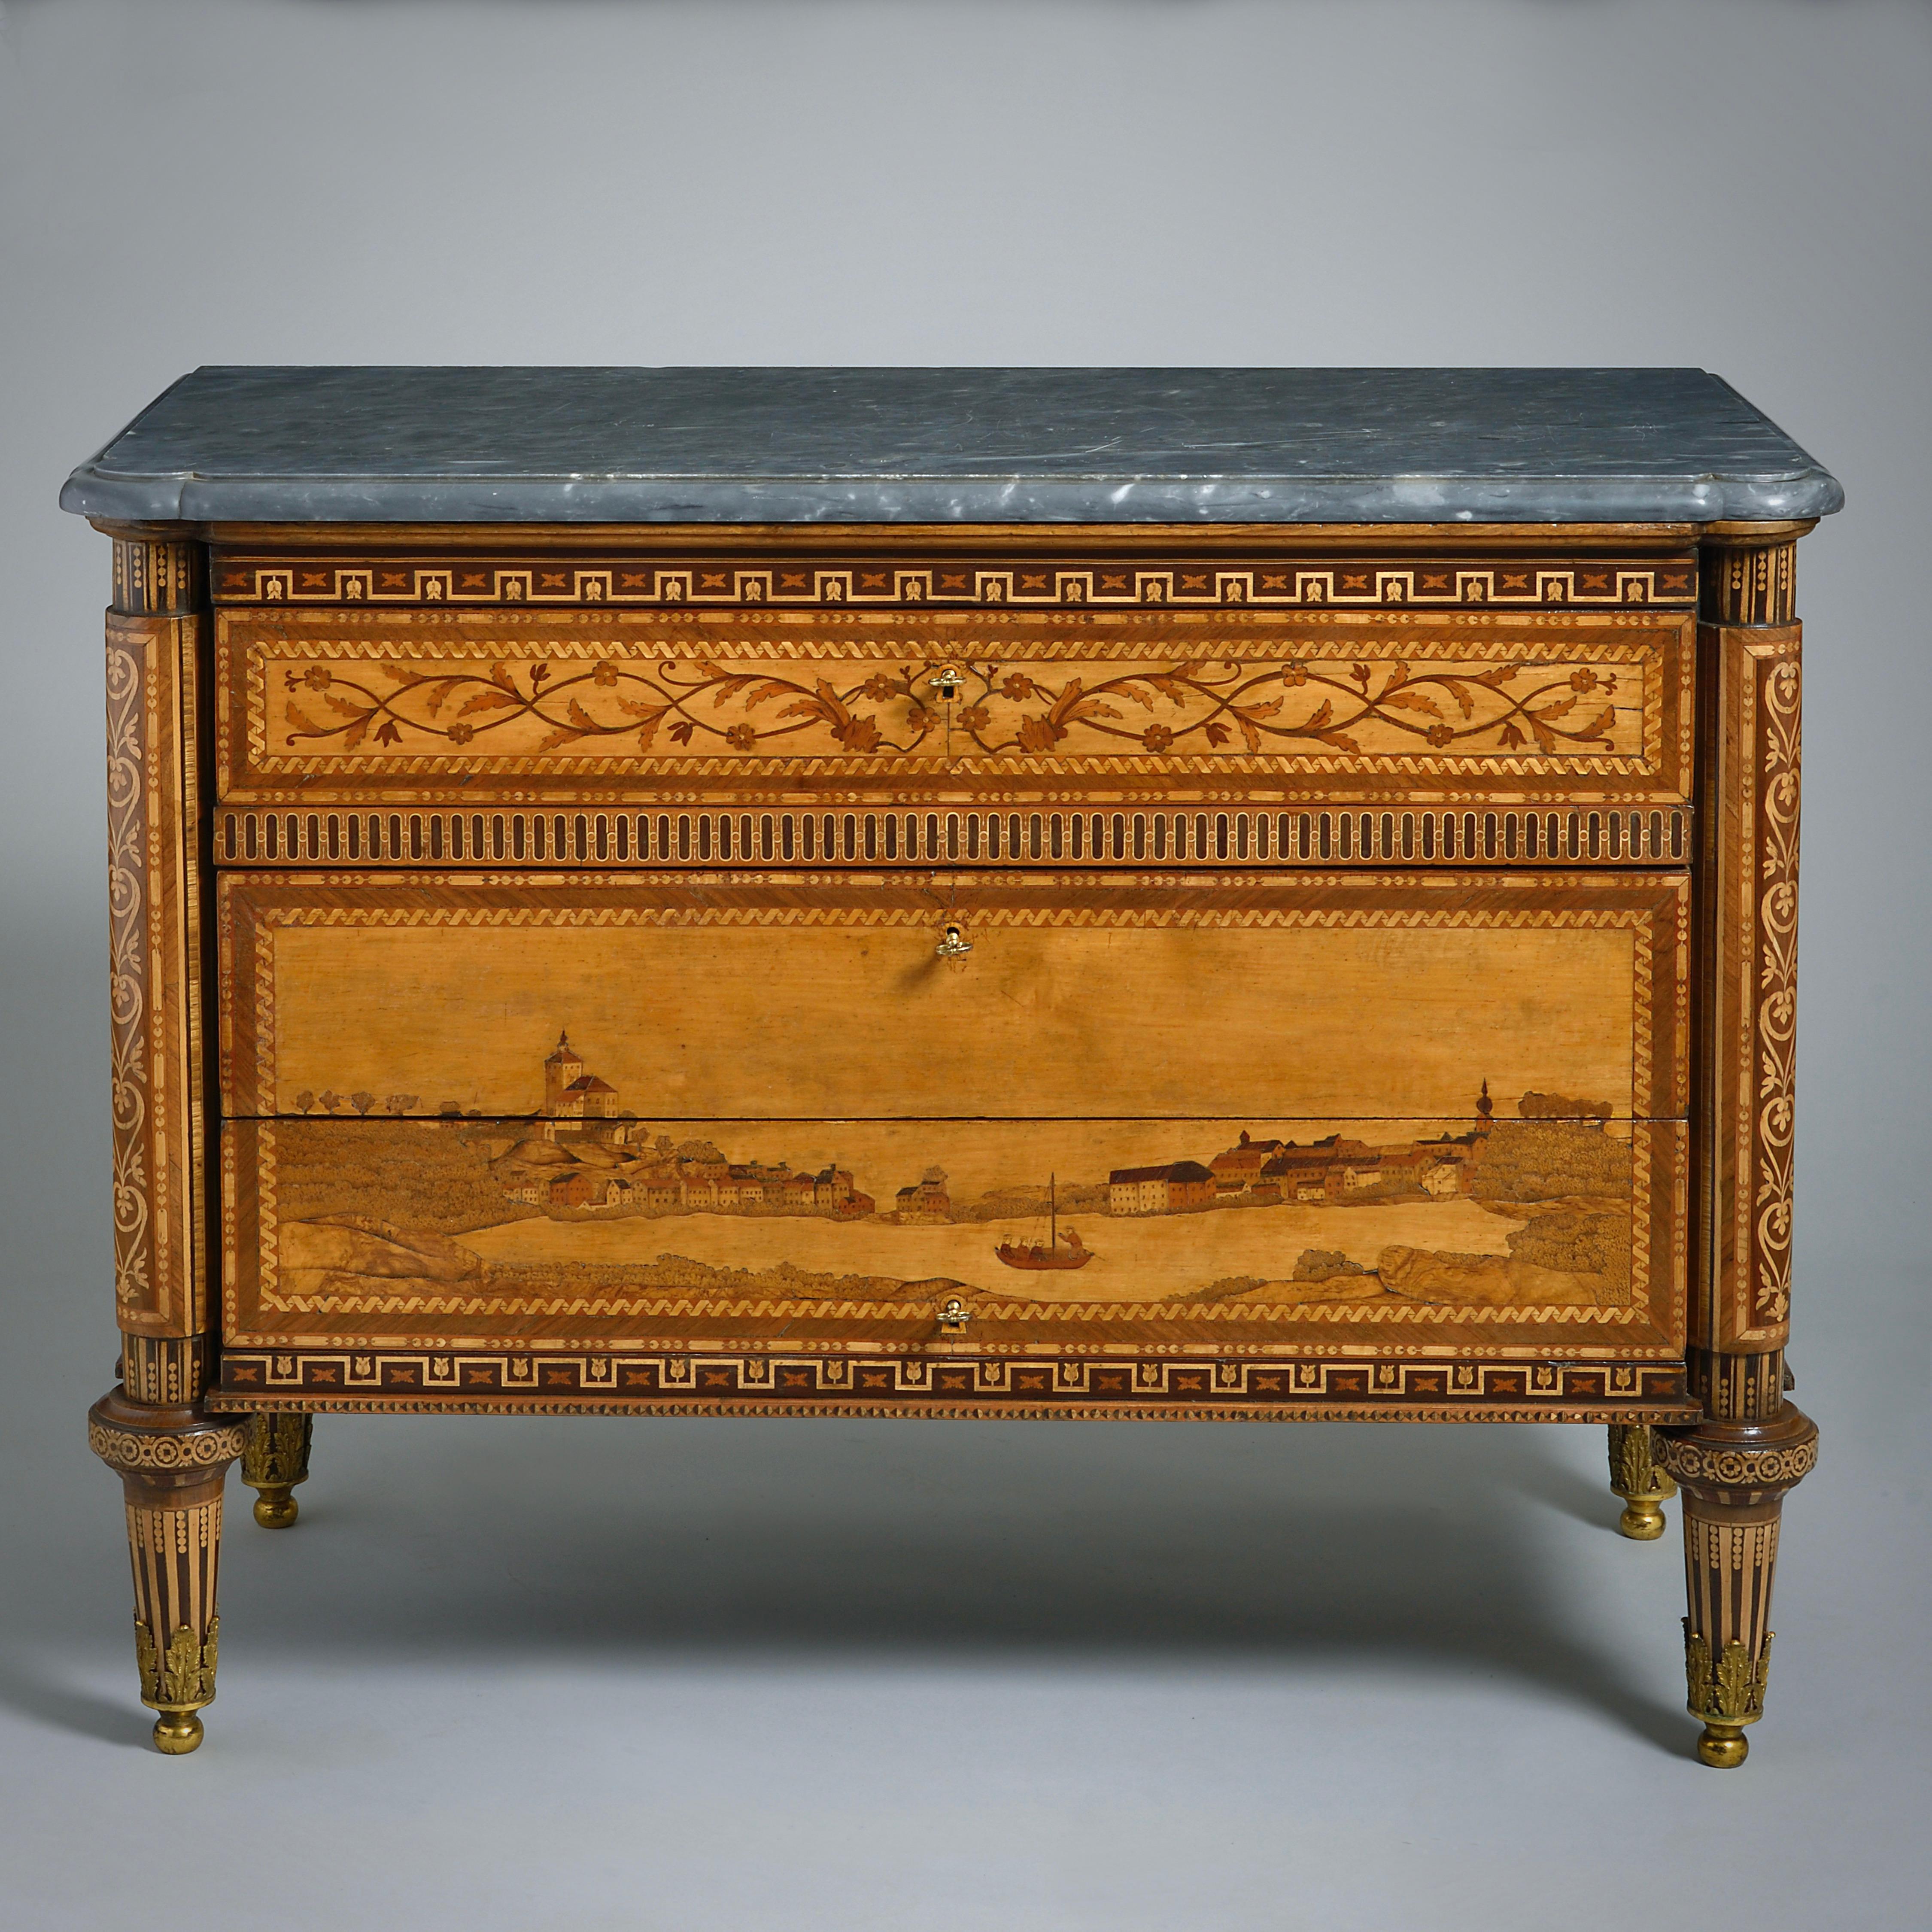 An exceptional pair of Russian panoramic marquetry commodes by Nikifor Vasilyev, St. Petersburg, circa 1780.

Each with it’s original eared and moulded bardiglio marble top. The front and sides elaborately inlaid in various woods including